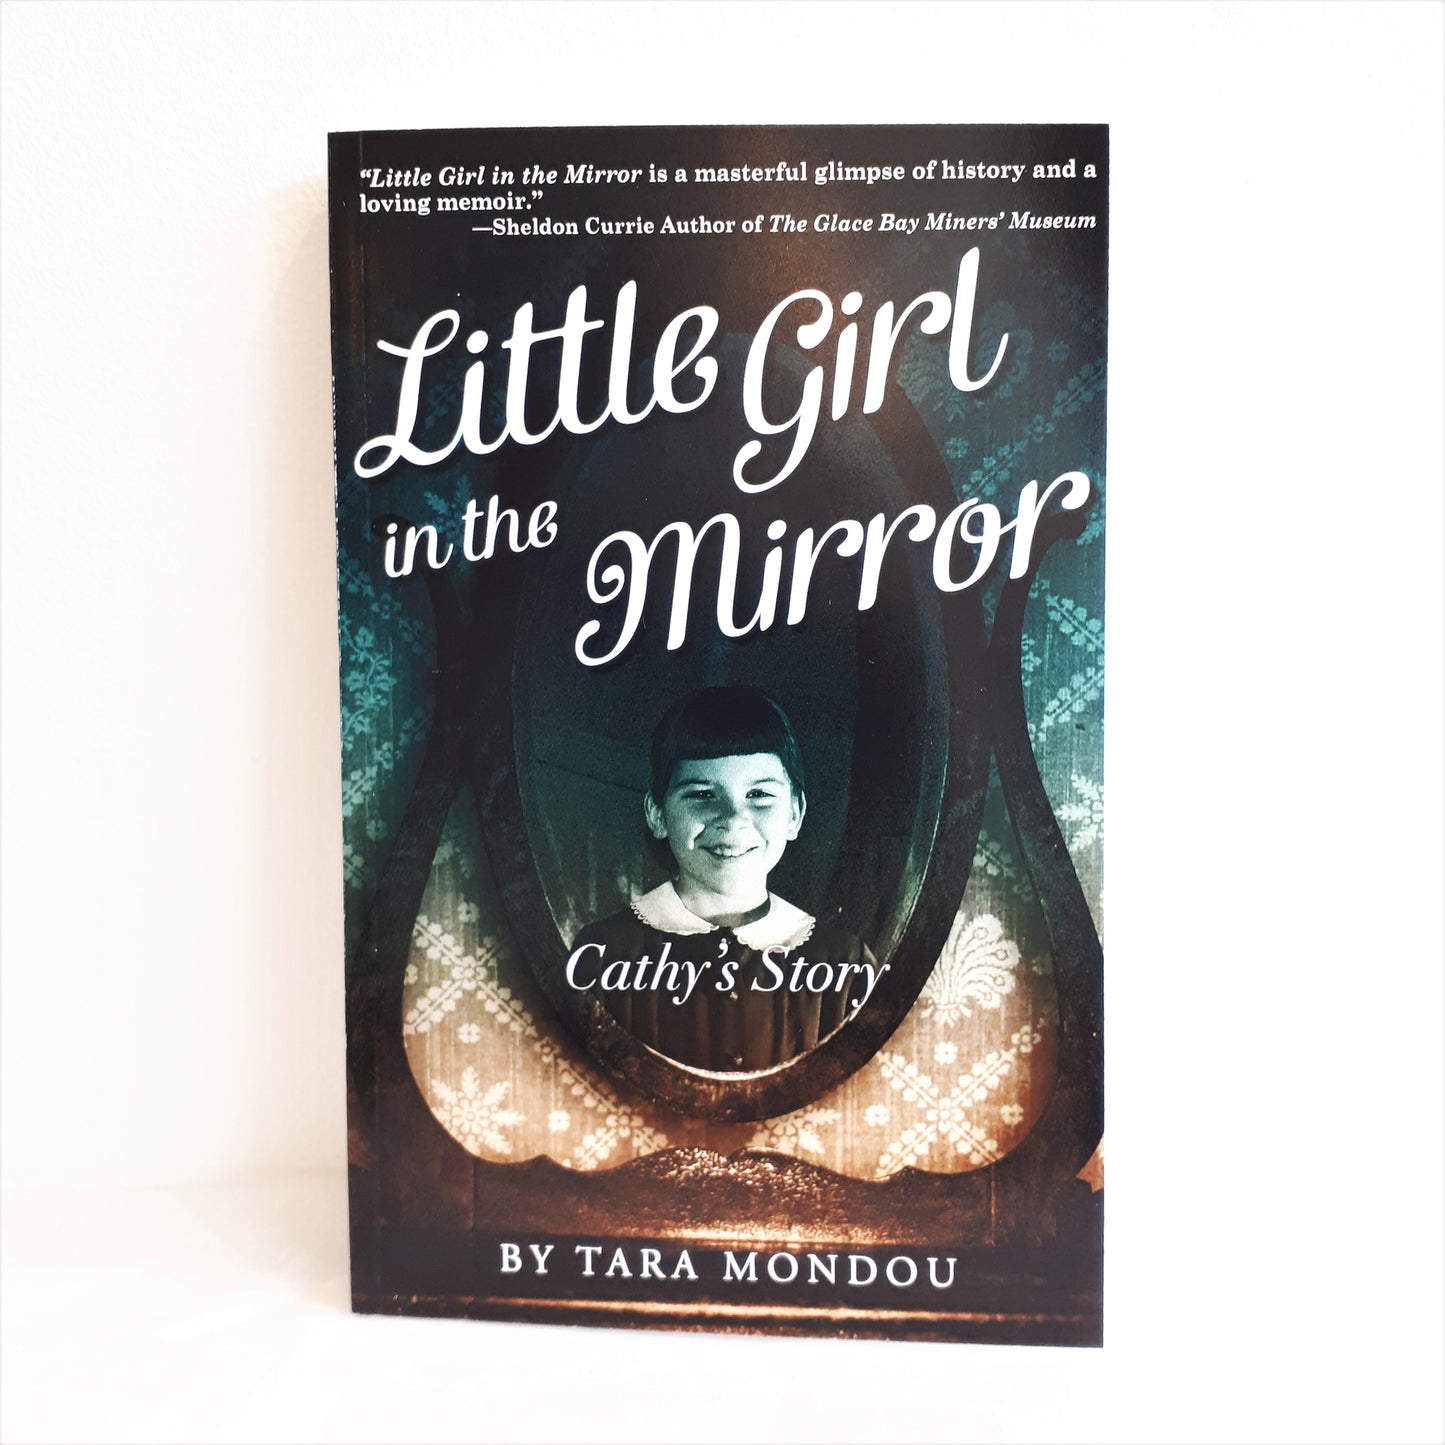 Little Girl in the Mirror, Cathy's Story by Tara Mondou